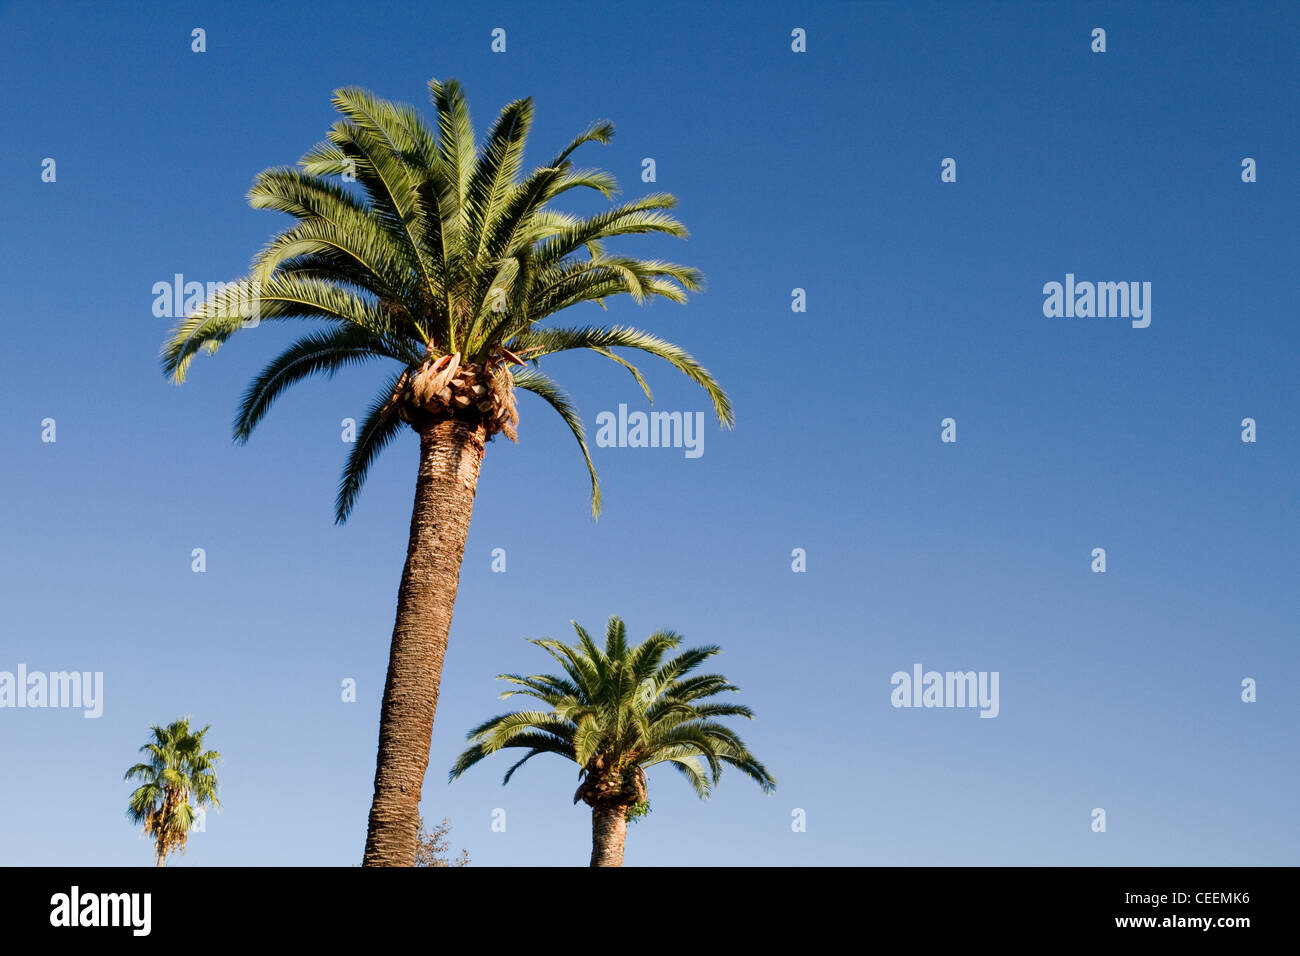 Three palm trees in a city park in Bilbao Spain Stock Photo